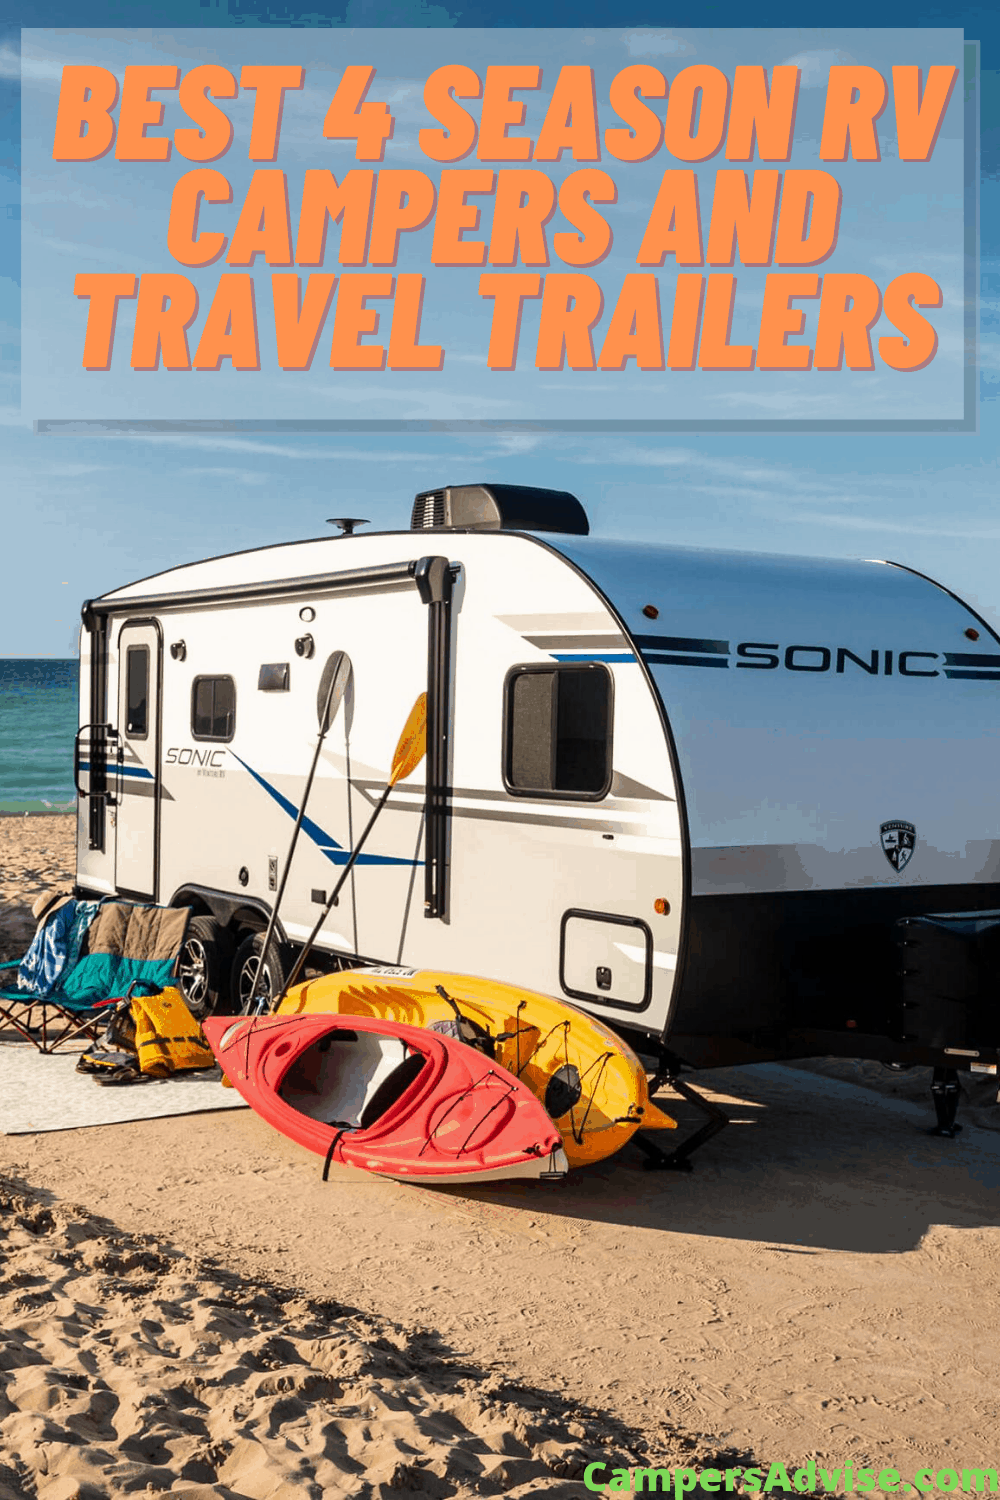 Best 4 Season RV Campers and Travel Trailers (2021)